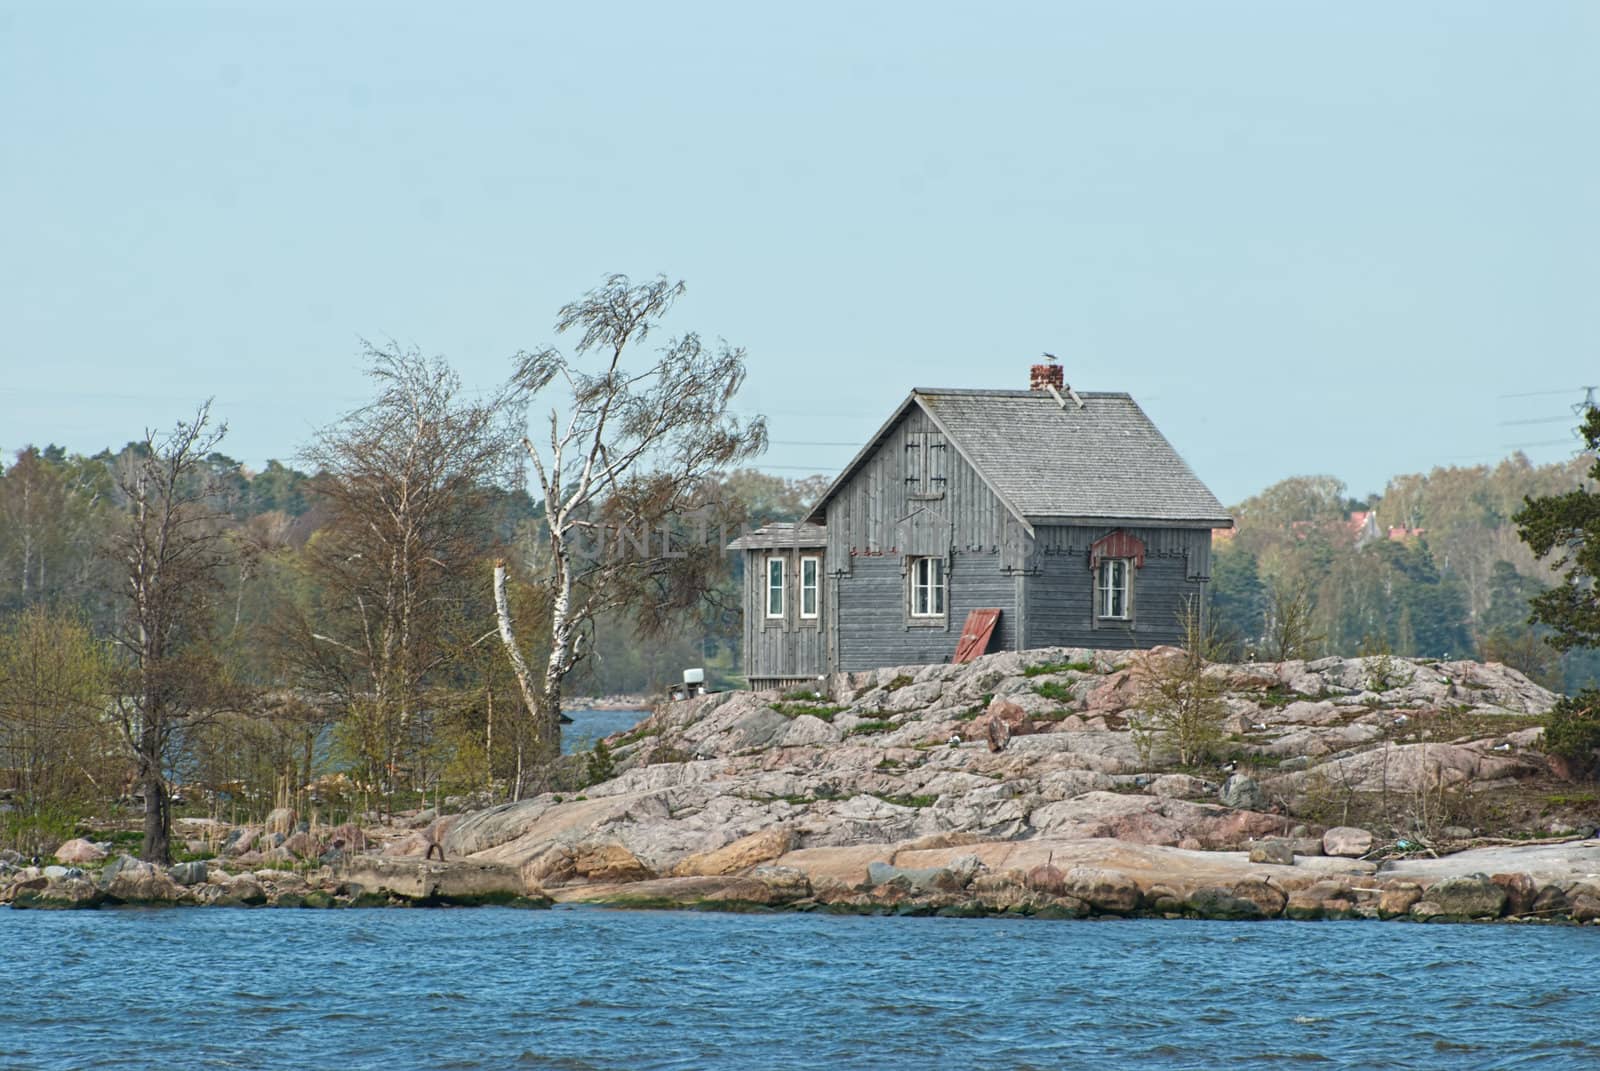 A lonely wooden house on the island.